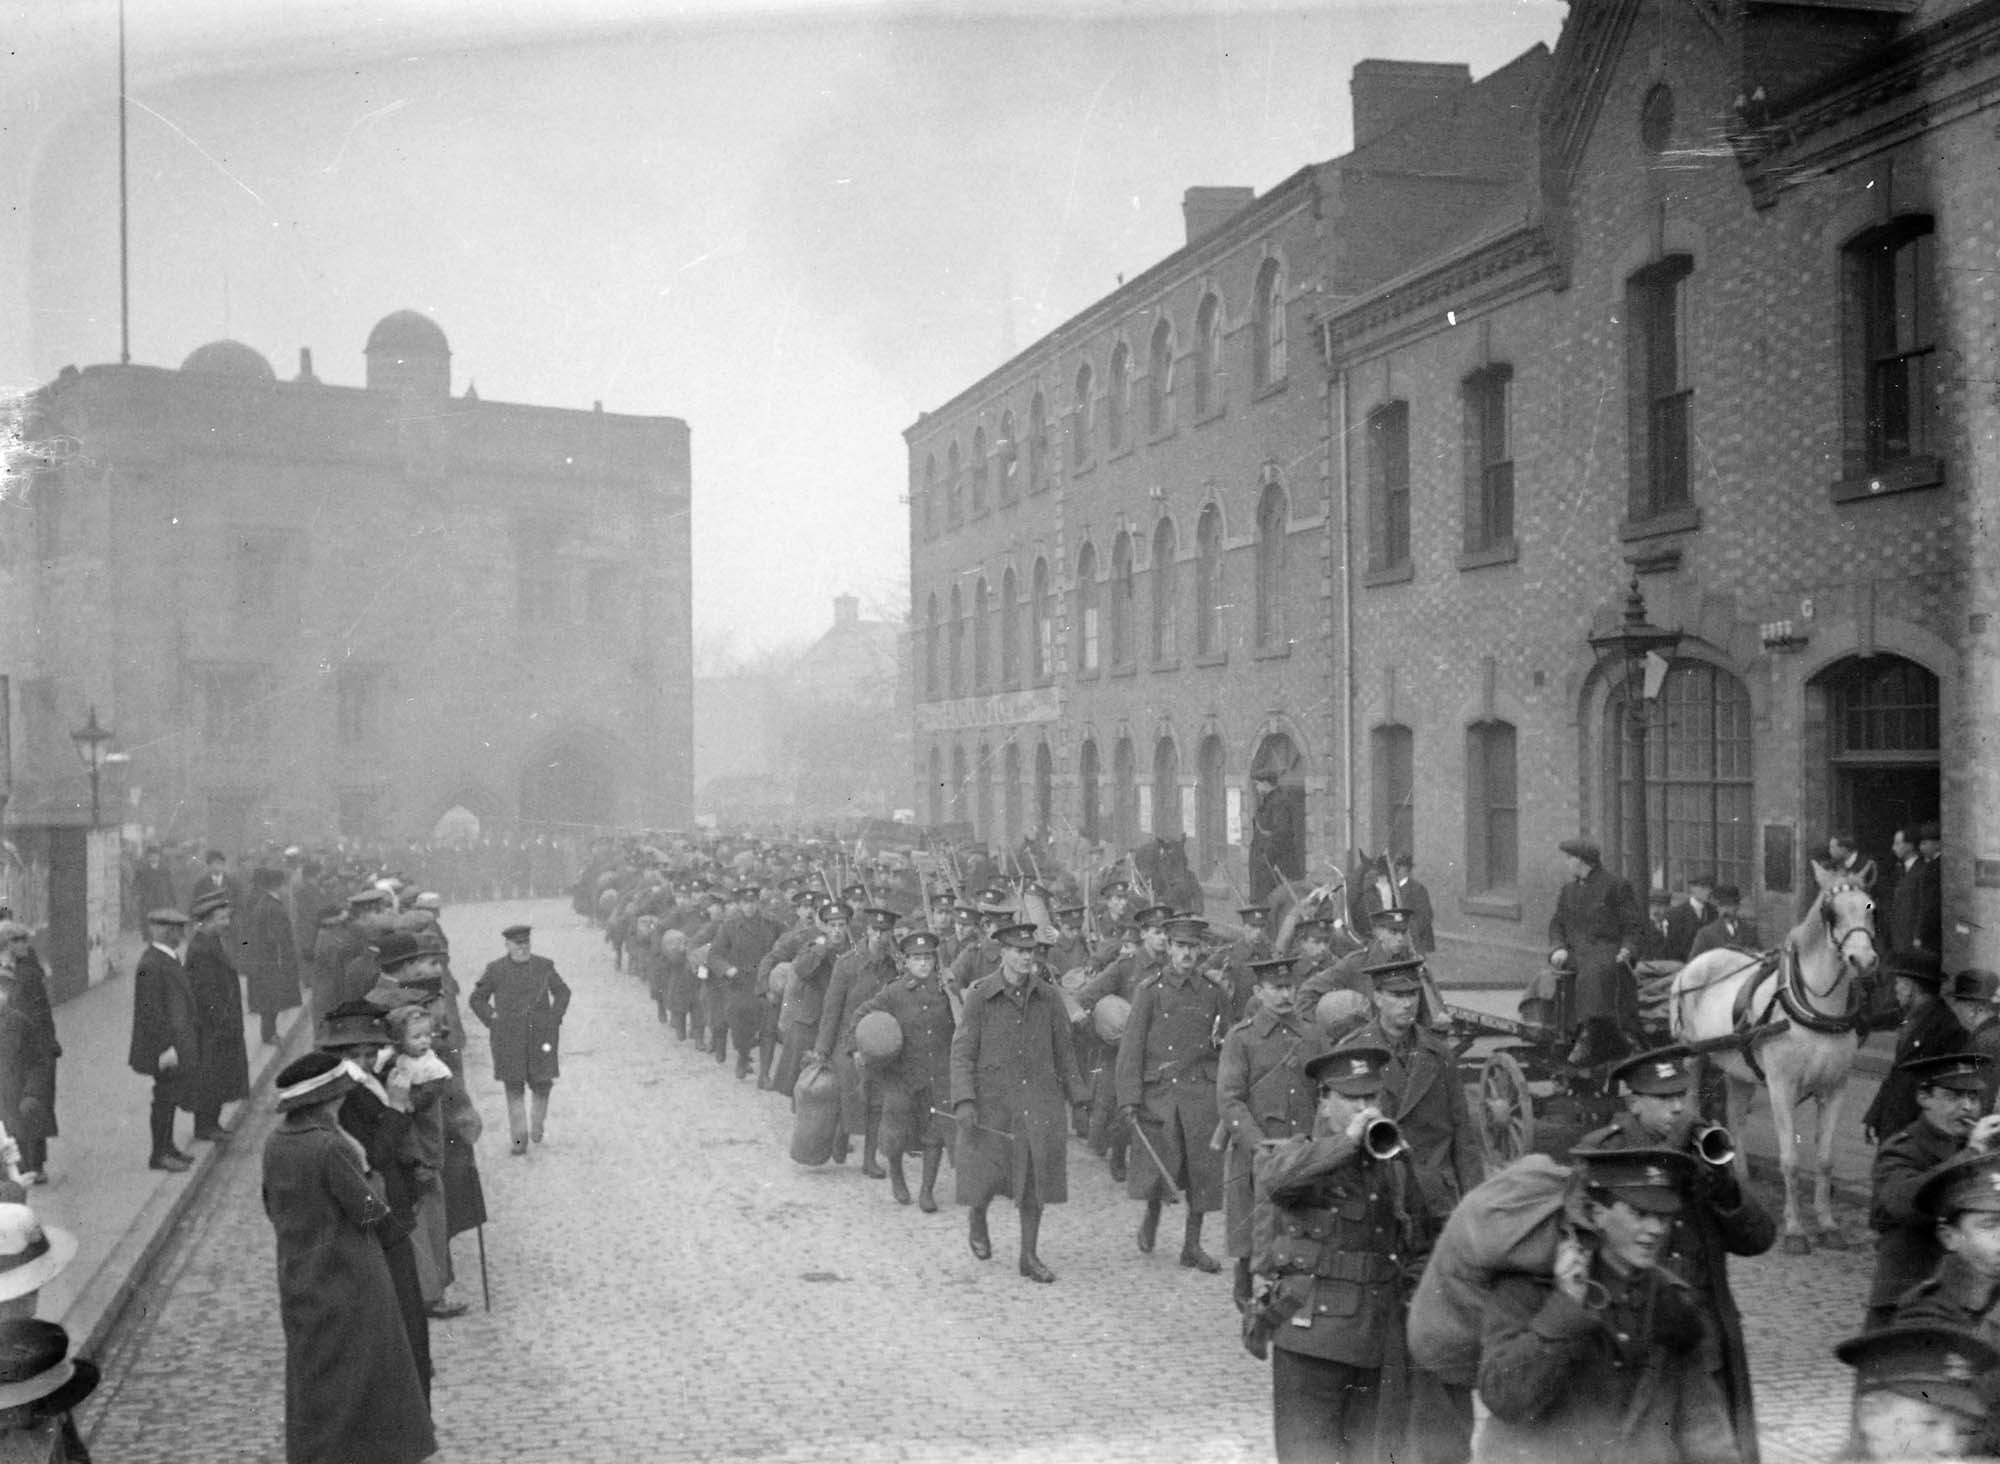 Fully accoutred troops of Leicestershire Regiment marching down Newarke Street, 1914 -